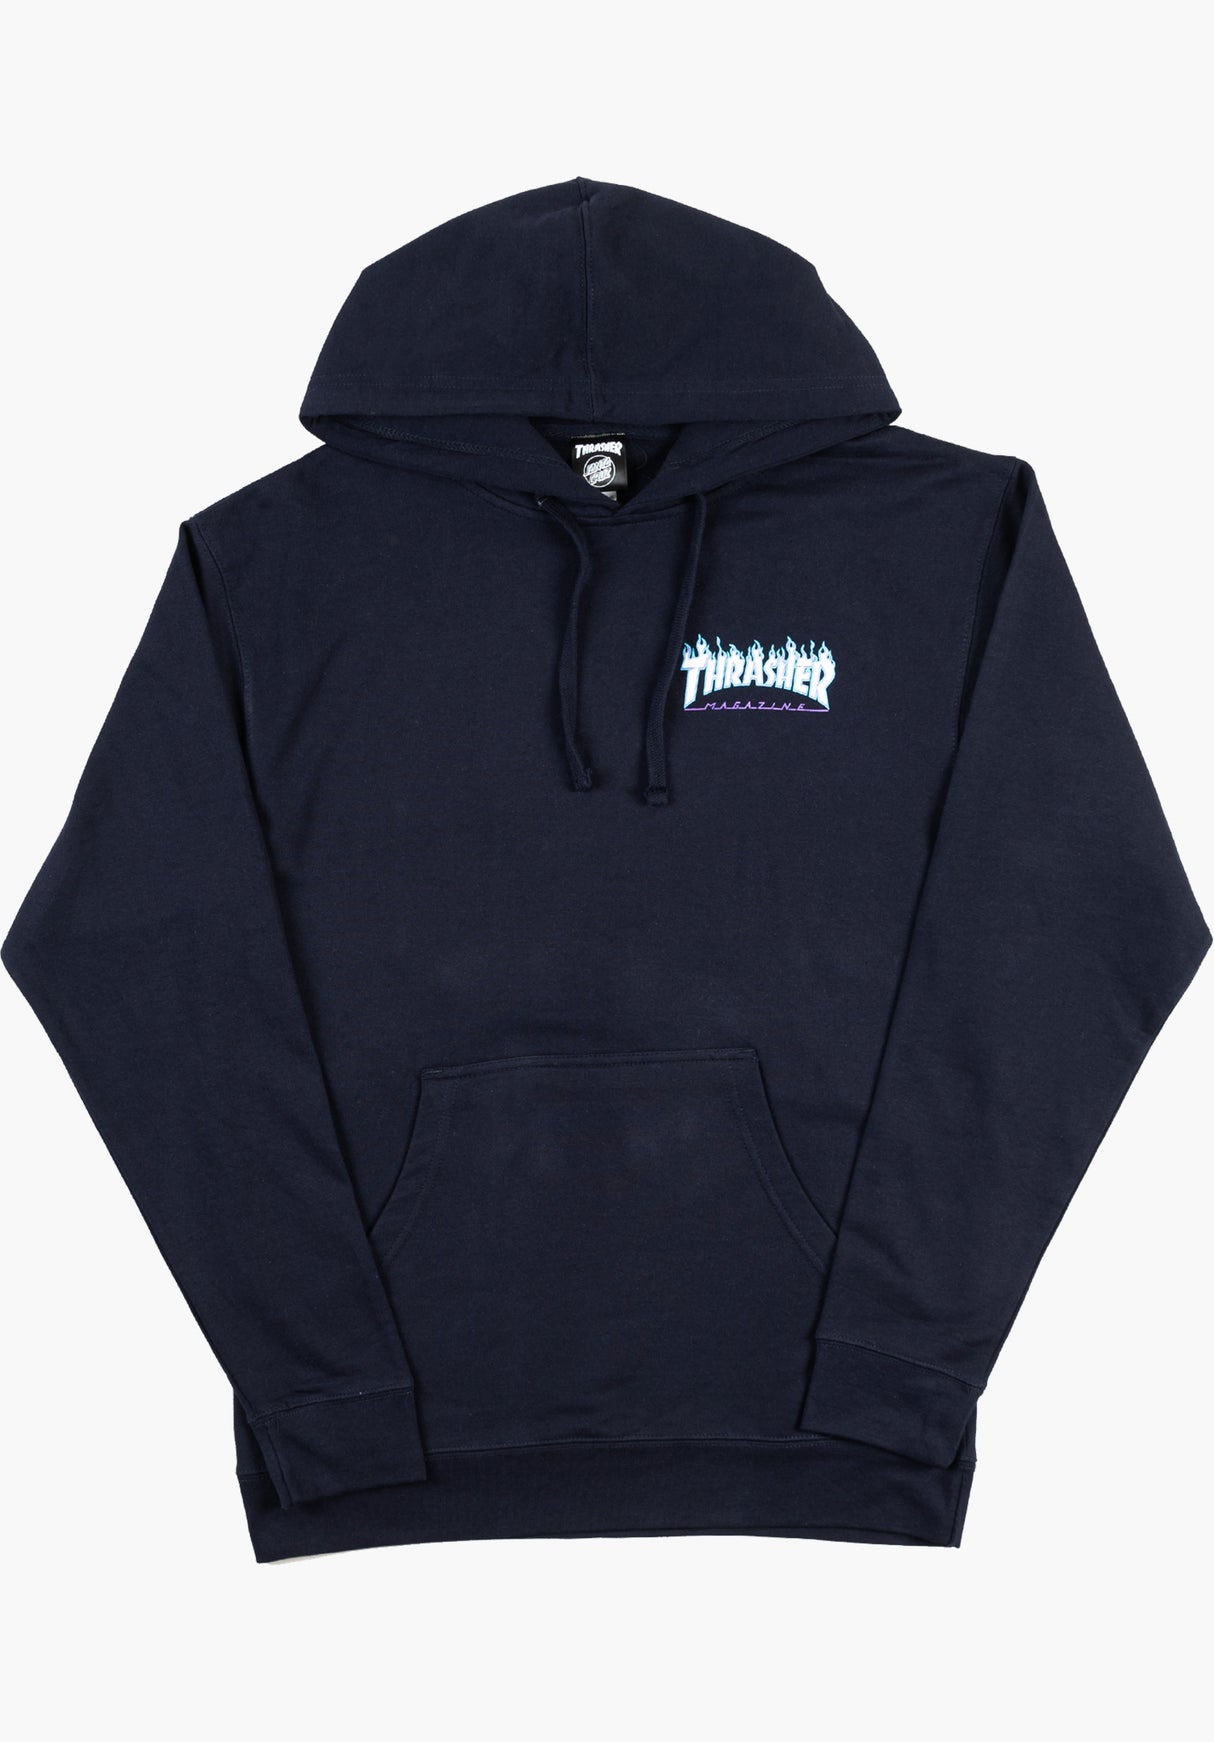 Thrasher Flame Dot Girl Hooded navy Close-Up1